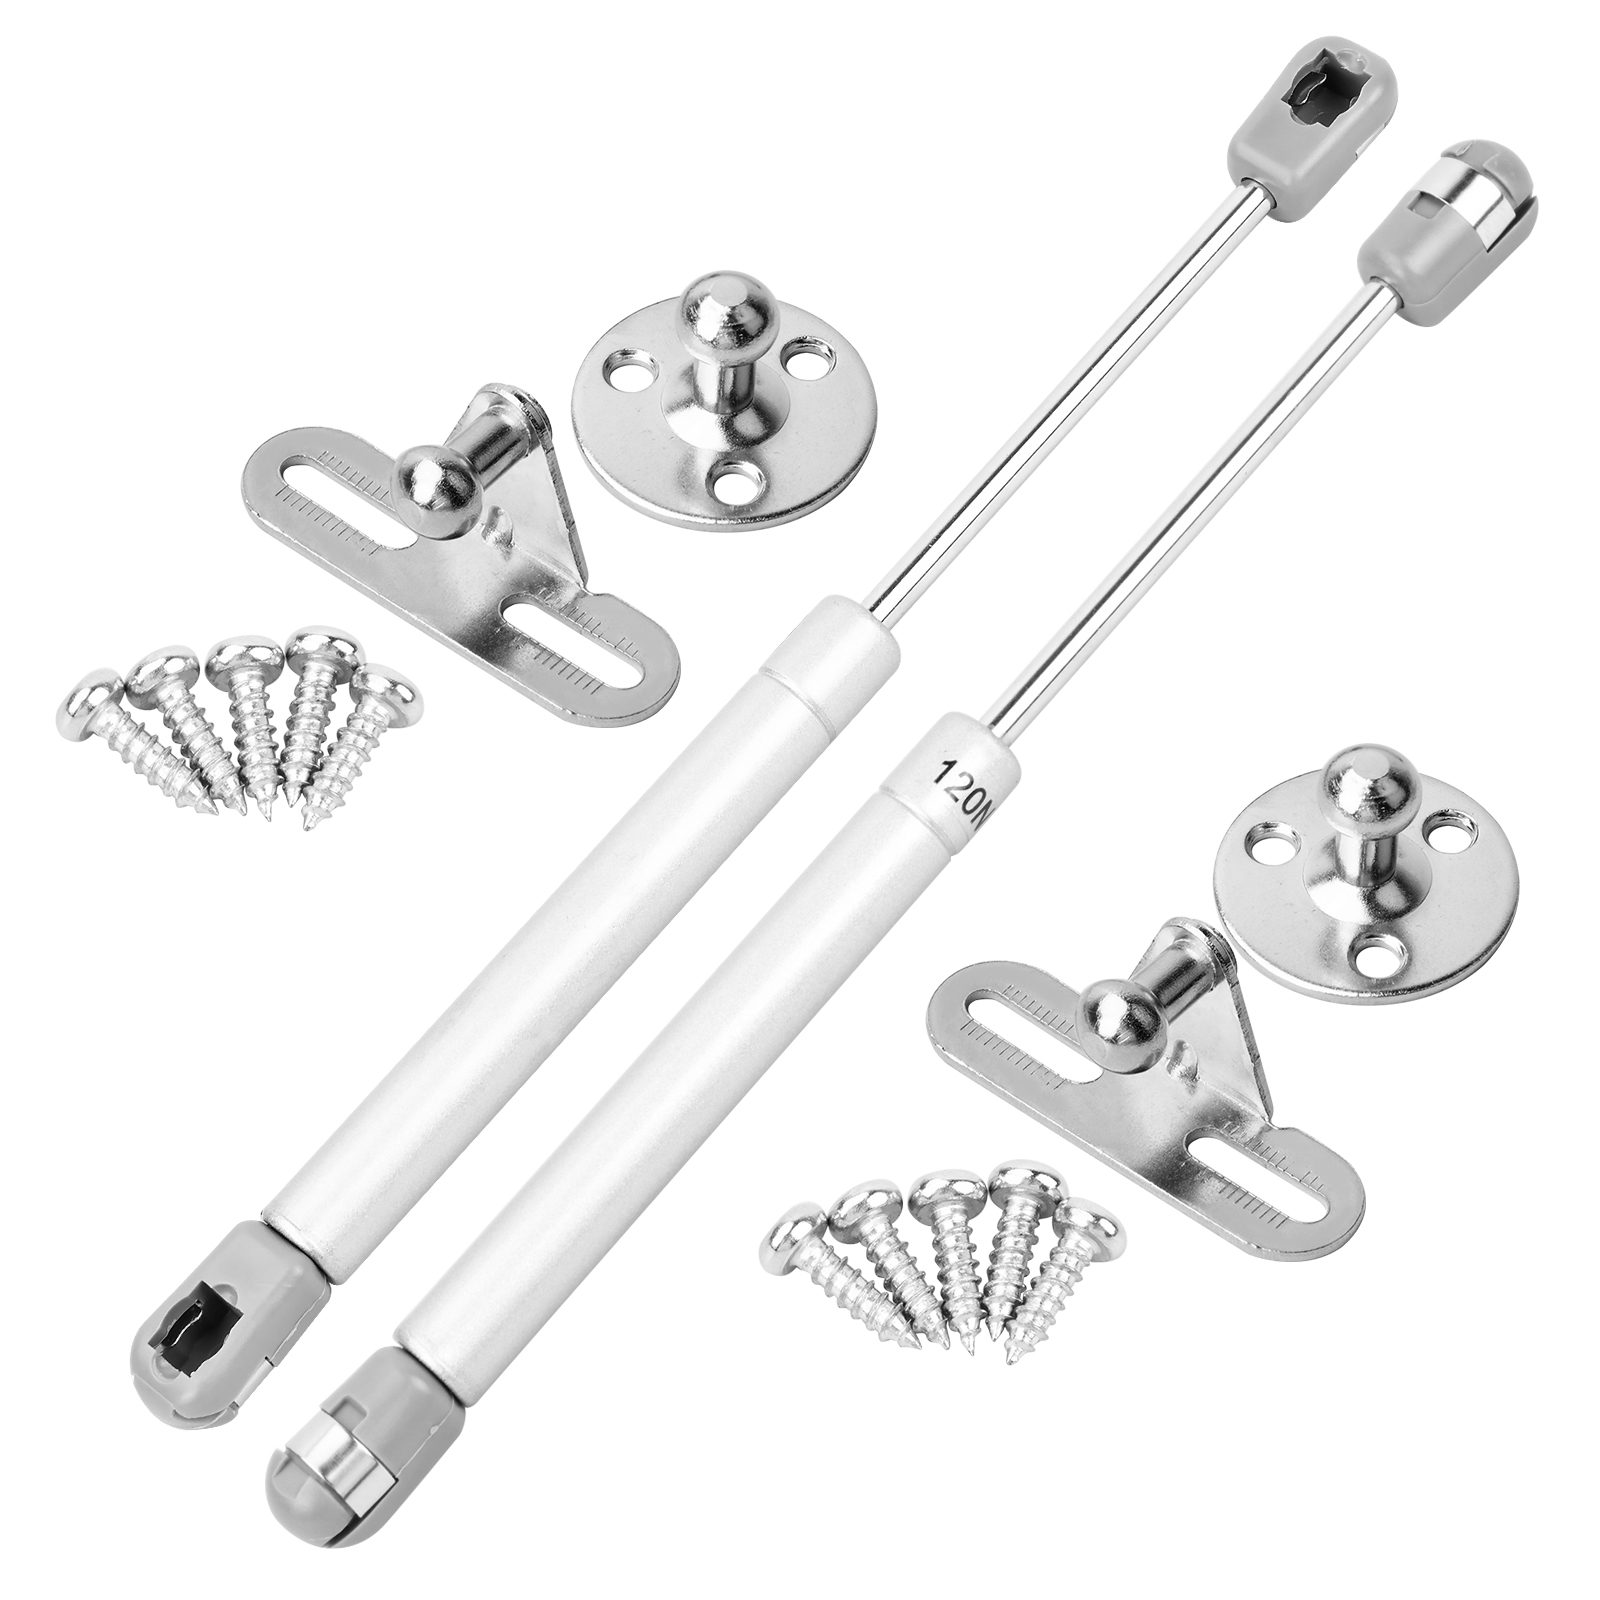 

2pcs Gas Struts, Soft Open Lid Safety Hinges For Kitchen Cabinet Doors, Soft Open Lid Safety Hinges